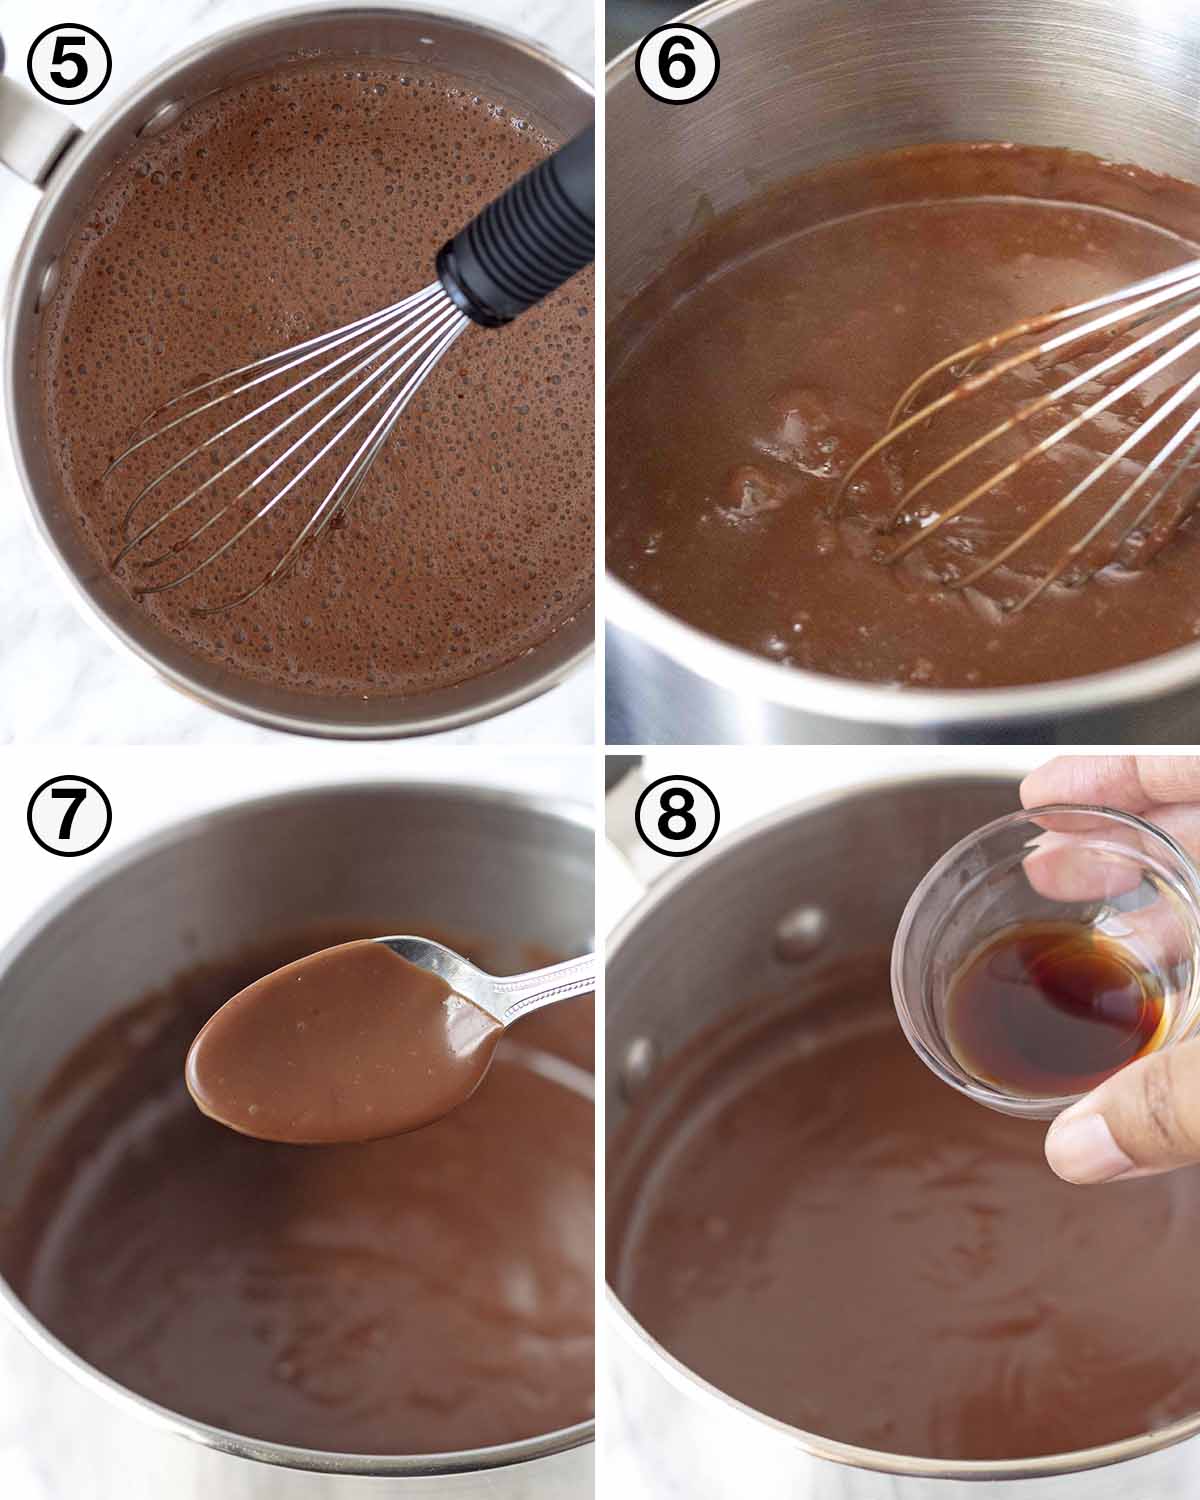 A collage of four images showing the second set of steps needed to make vegan chocolate pudding.